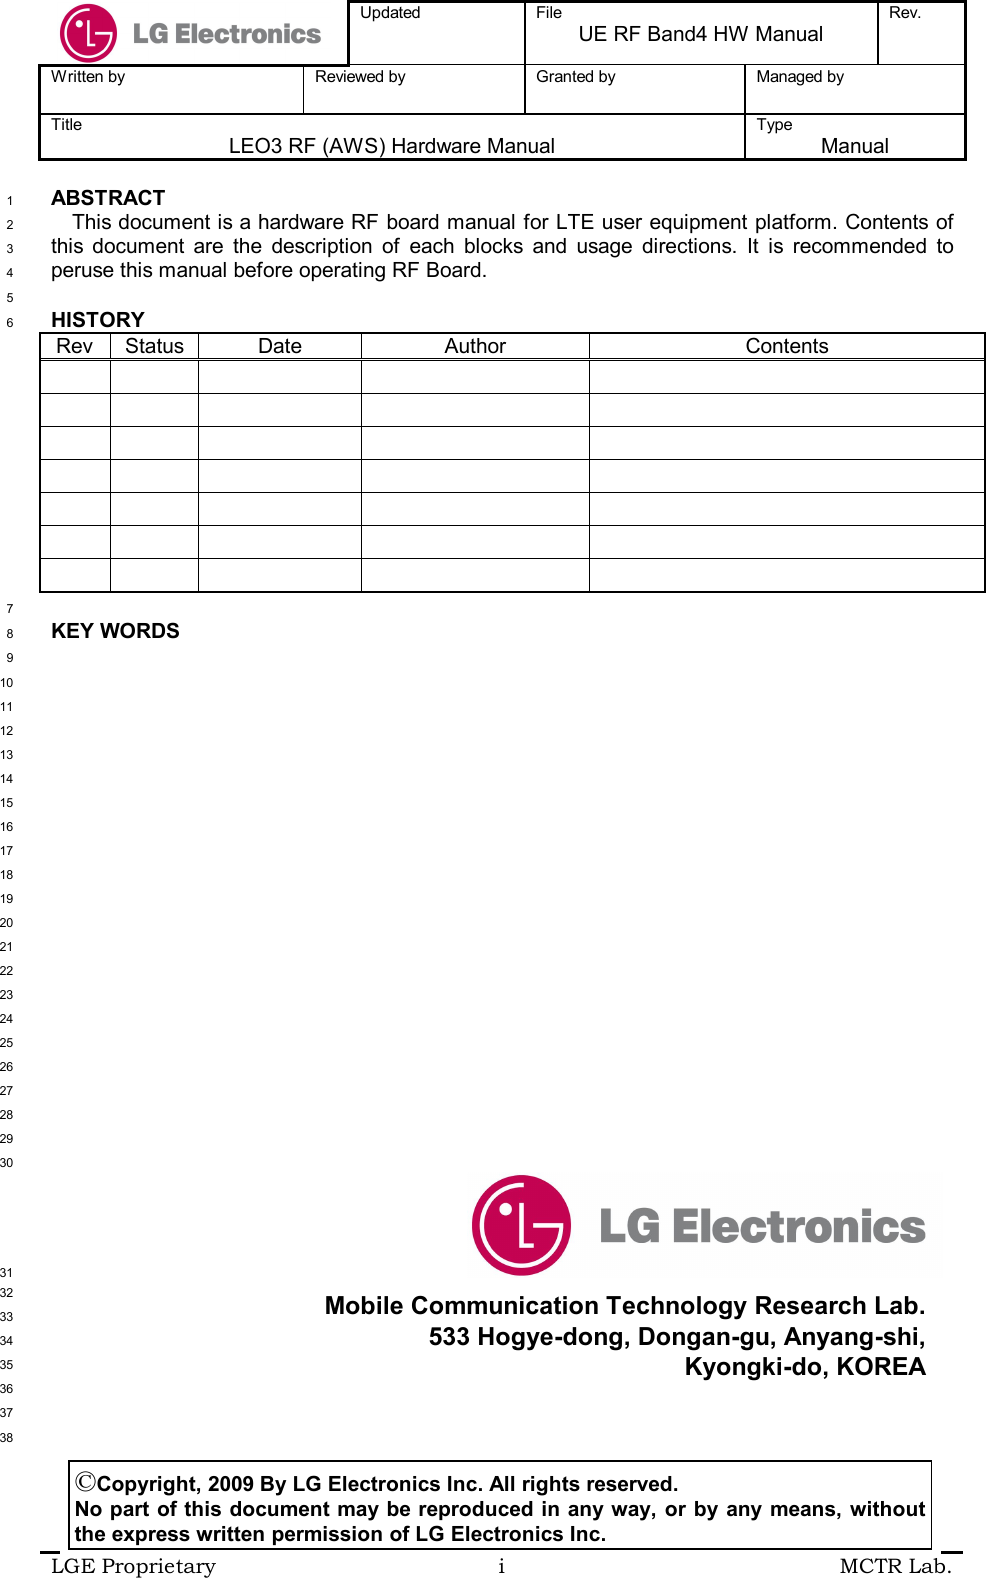  Updated  File UE RF Band4 HW Manual Rev.  Written by  Reviewed by  Granted by  Managed by  Title LEO3 RF (AWS) Hardware Manual Type  Manual  LGE Proprietary  i  MCTR Lab.  ABSTRACT 1 This document is a hardware RF board manual for LTE user equipment platform. Contents of 2 this  document  are  the  description  of  each  blocks  and  usage  directions.  It  is  recommended  to 3 peruse this manual before operating RF Board. 4  5 HISTORY 6 Rev Status Date  Author  Contents                                                                 7 KEY WORDS 8  9  10  11  12  13  14  15  16  17  18  19  20  21  22  23  24  25  26  27  28  29  30                                                                   31  32  33  34  35  36  37  38 ©Copyright, 2009 By LG Electronics Inc. All rights reserved. No part of this document may be reproduced in any way, or by any means, without the express written permission of LG Electronics Inc. Mobile Communication Technology Research Lab. 533 Hogye-dong, Dongan-gu, Anyang-shi, Kyongki-do, KOREA 